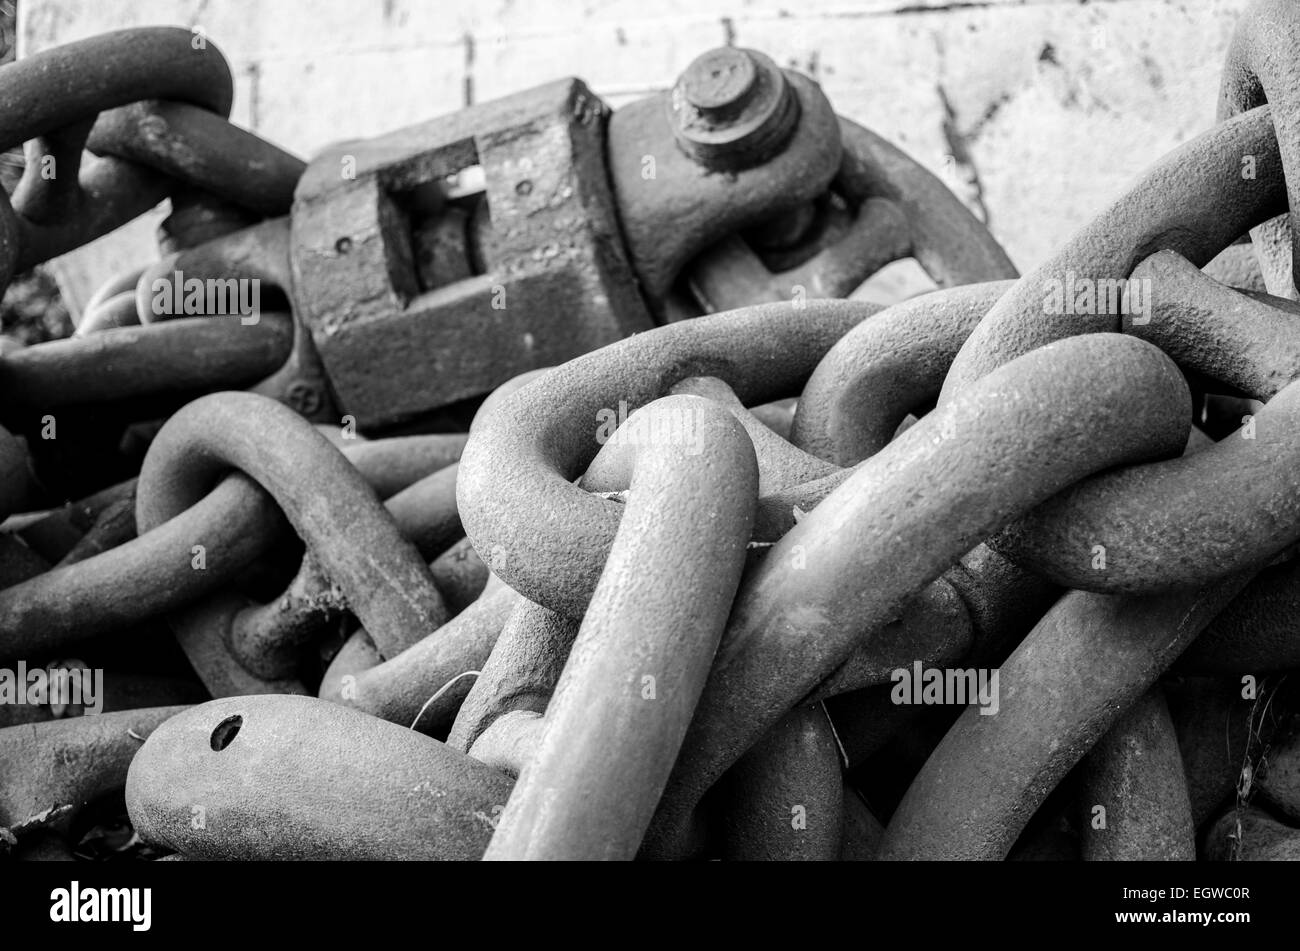 These huge chains are used to anchor mooring buoys for ships and boats. They are enormous and  perfectly weathered metal. Stock Photo